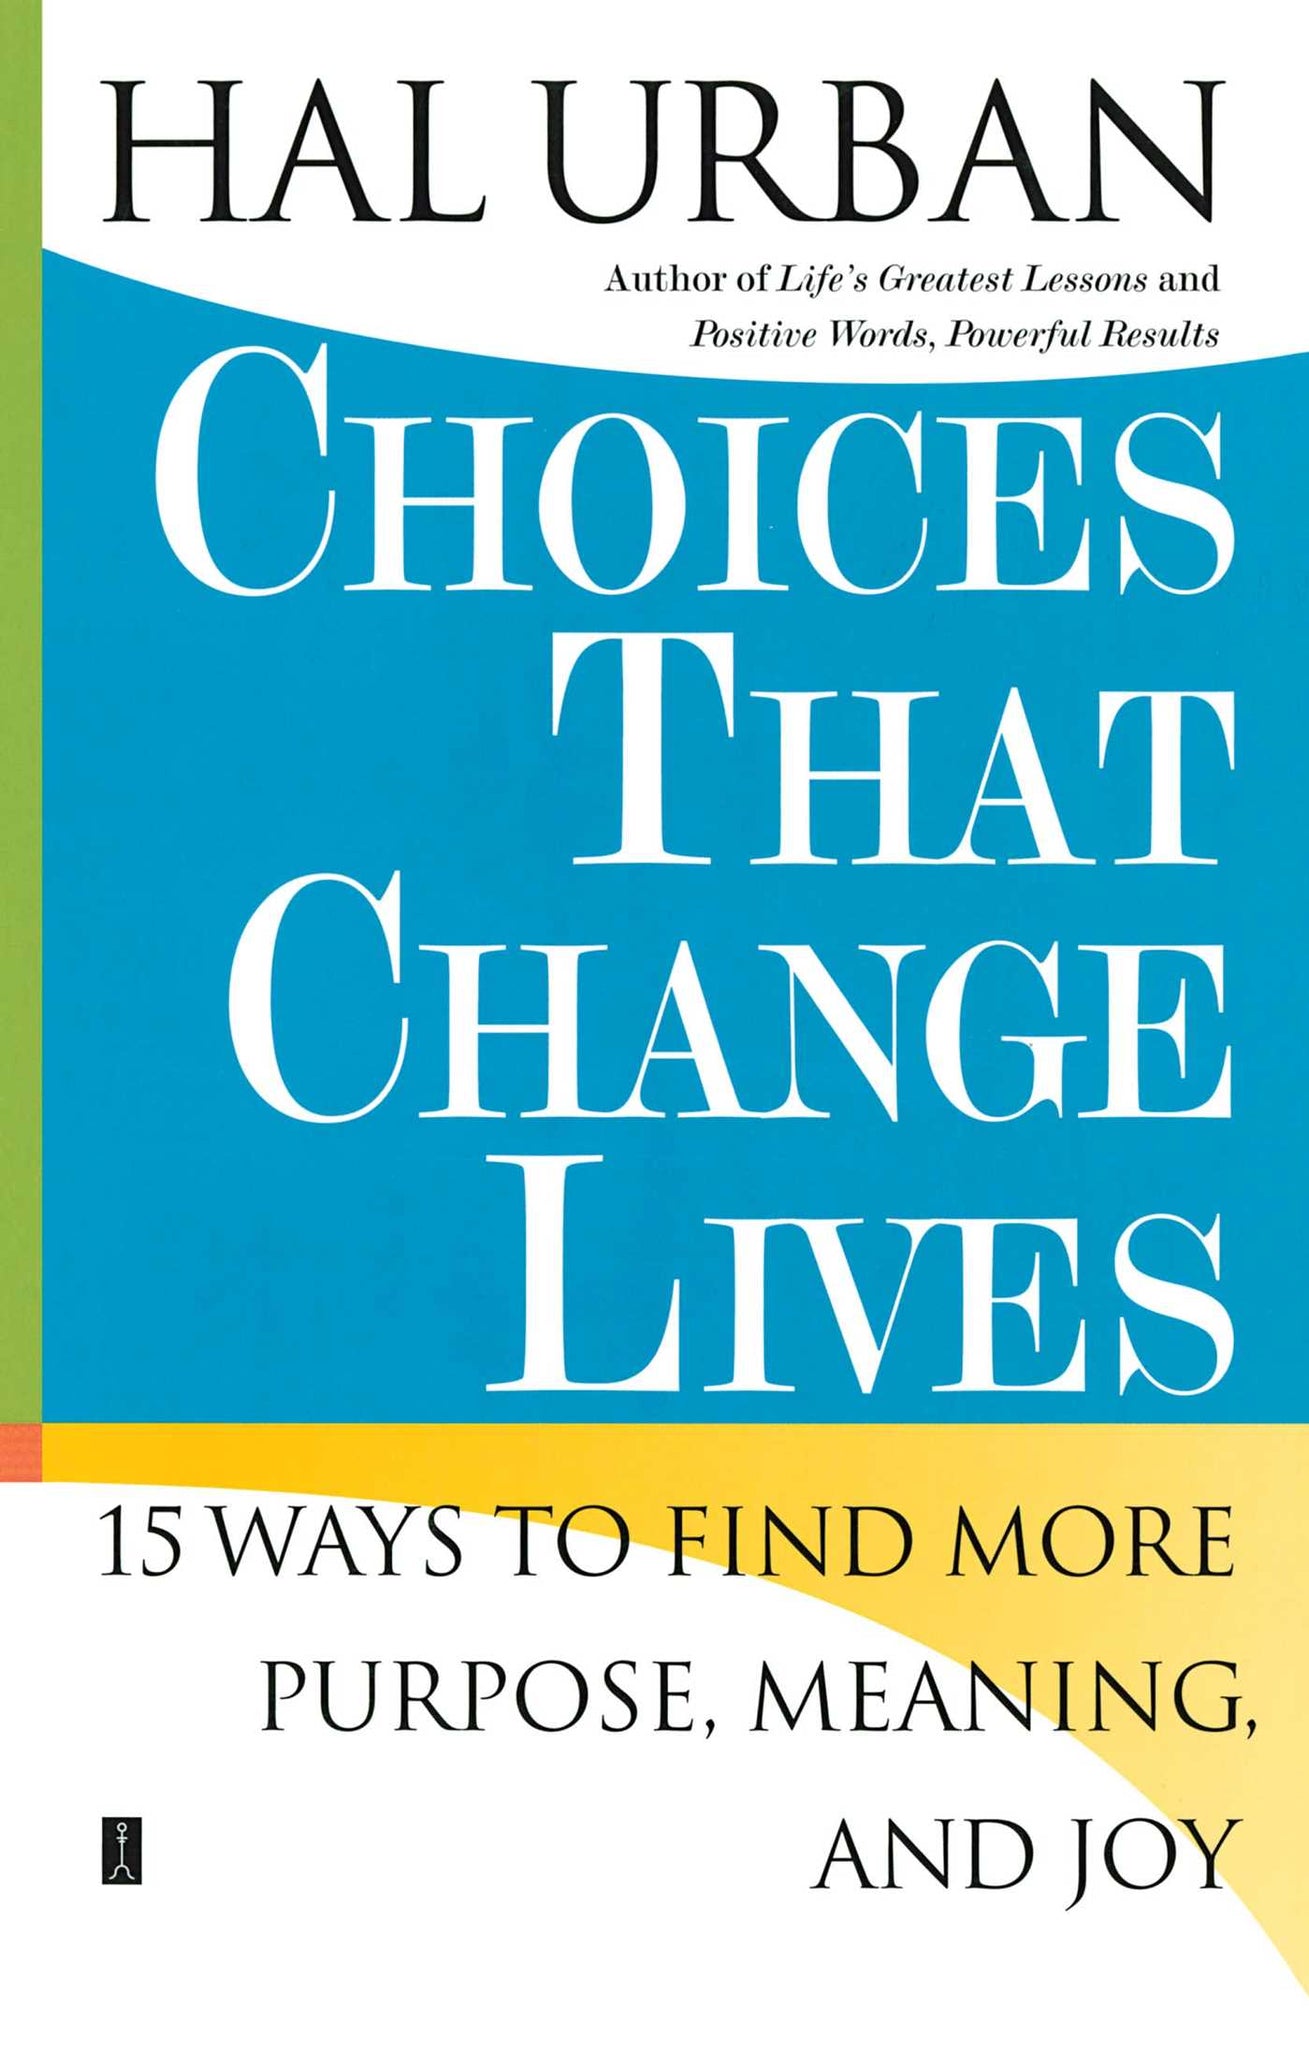 Choices That Change Lives : 15 Ways to Find More Purpose, Meaning, and Joy